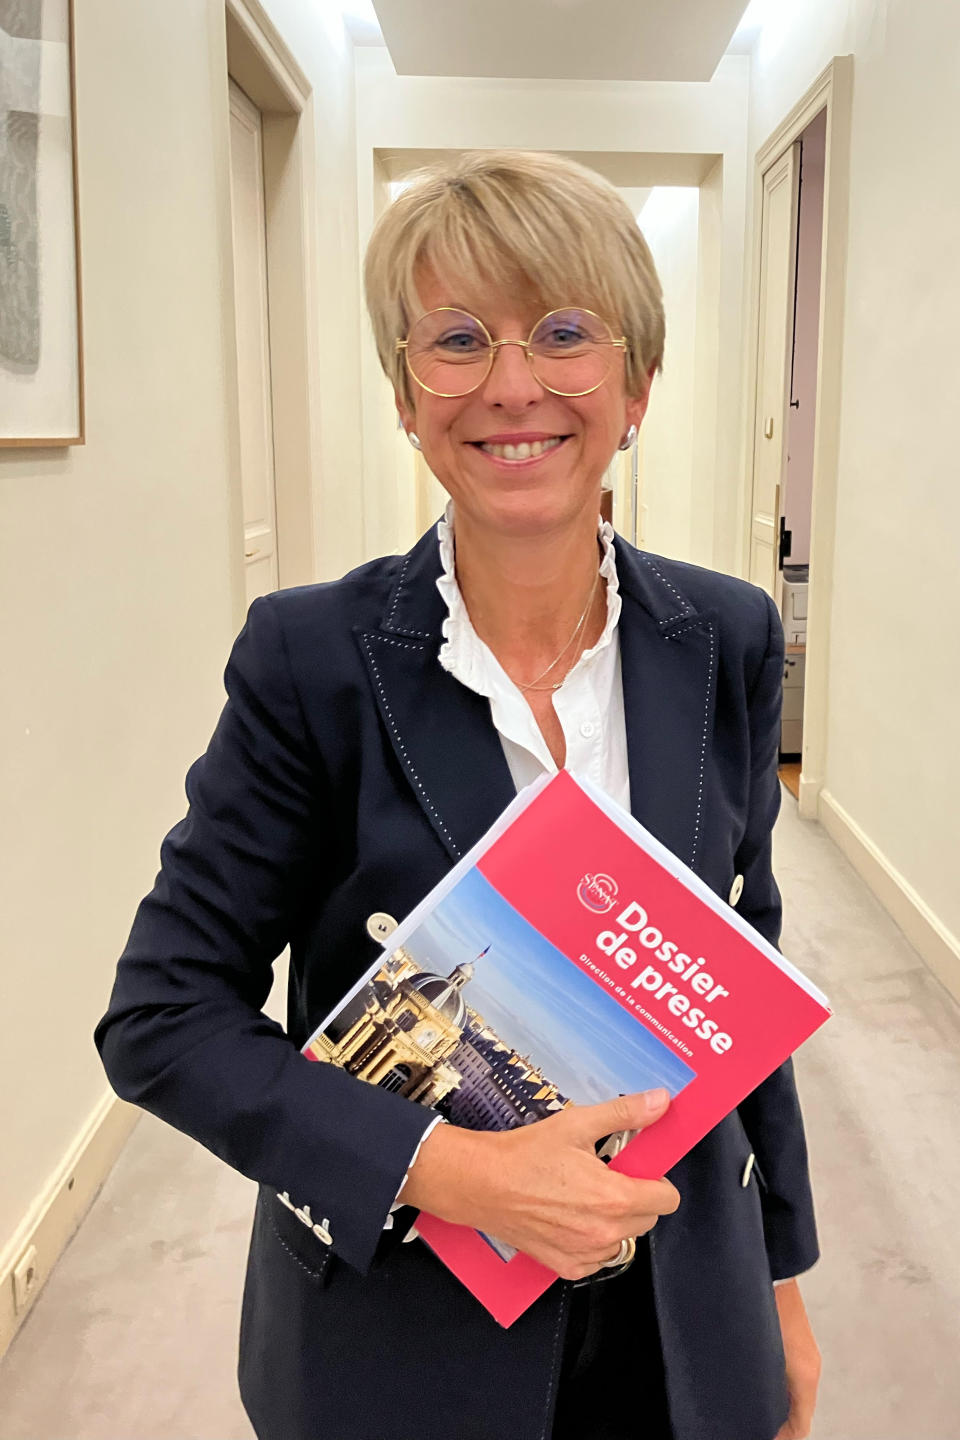 Annick Billon, co-author and president of the Senate's delegation, poses at the. French Senate, Wednesday, Sept. 28, 2022 in Paris. Sexual and physical abuse in France's porn industry is "systemic" and lawmakers should better regulate the production of videos and protect children who are "heavily exposed" to the content, according to a French Senate report. (AP Photo/Oleg Cetinic)